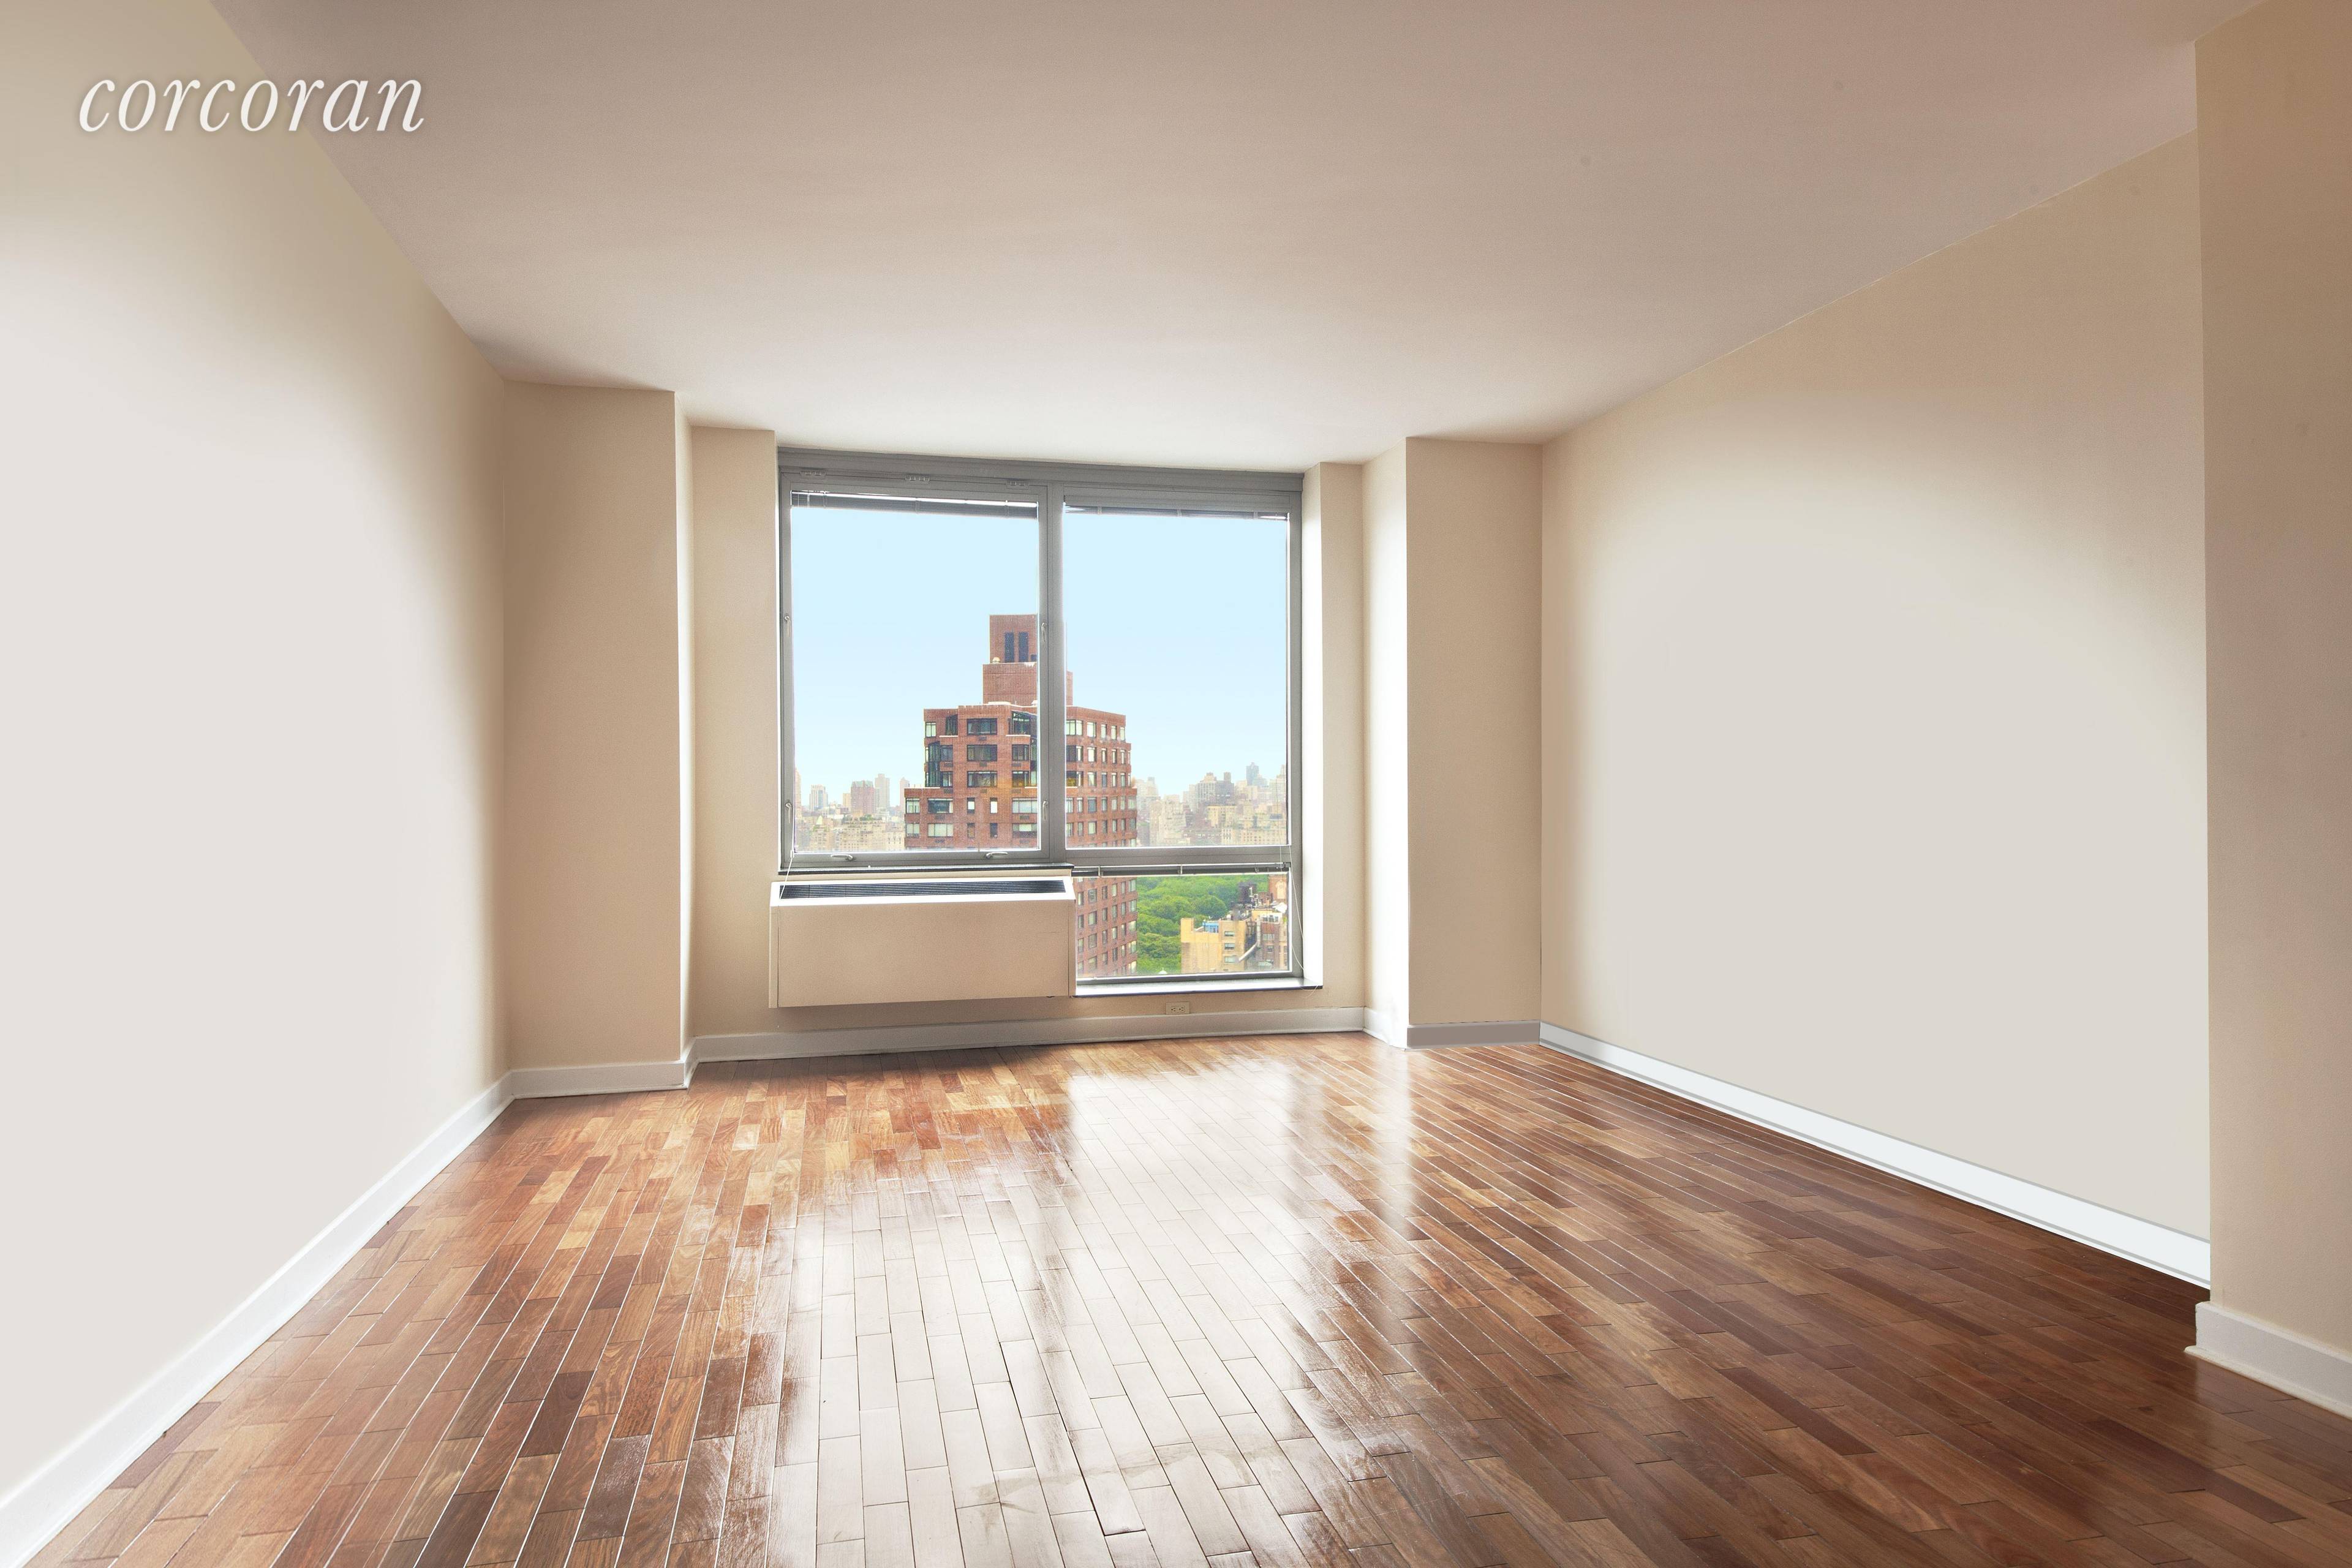 Stunning views of Central Park, and the entire city, are the first thing you will notice when you enter this property.